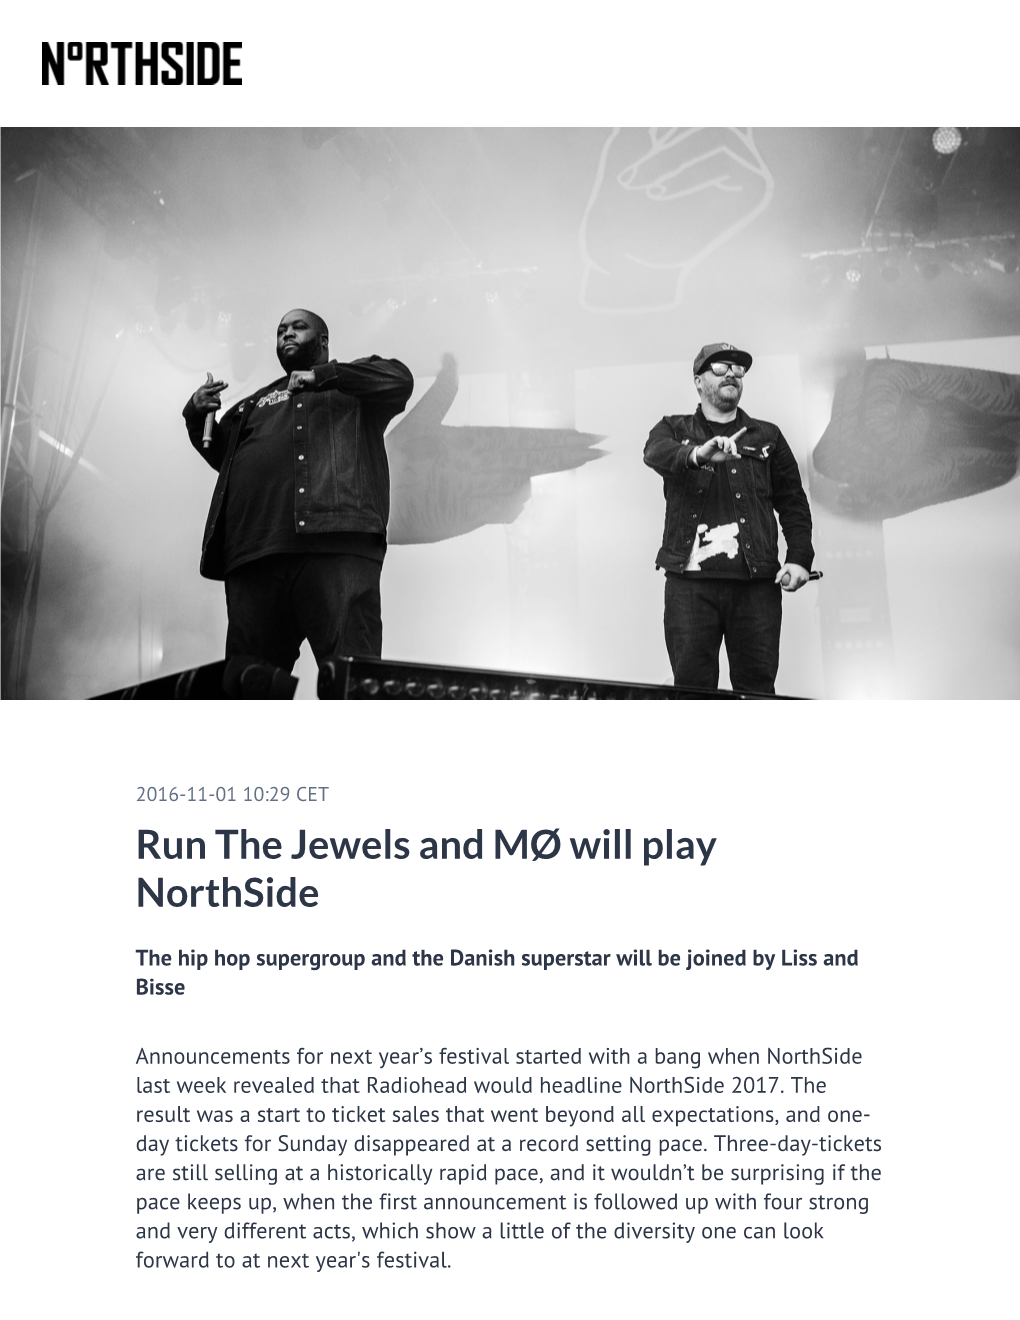 ​Run the Jewels and MØ Will Play Northside